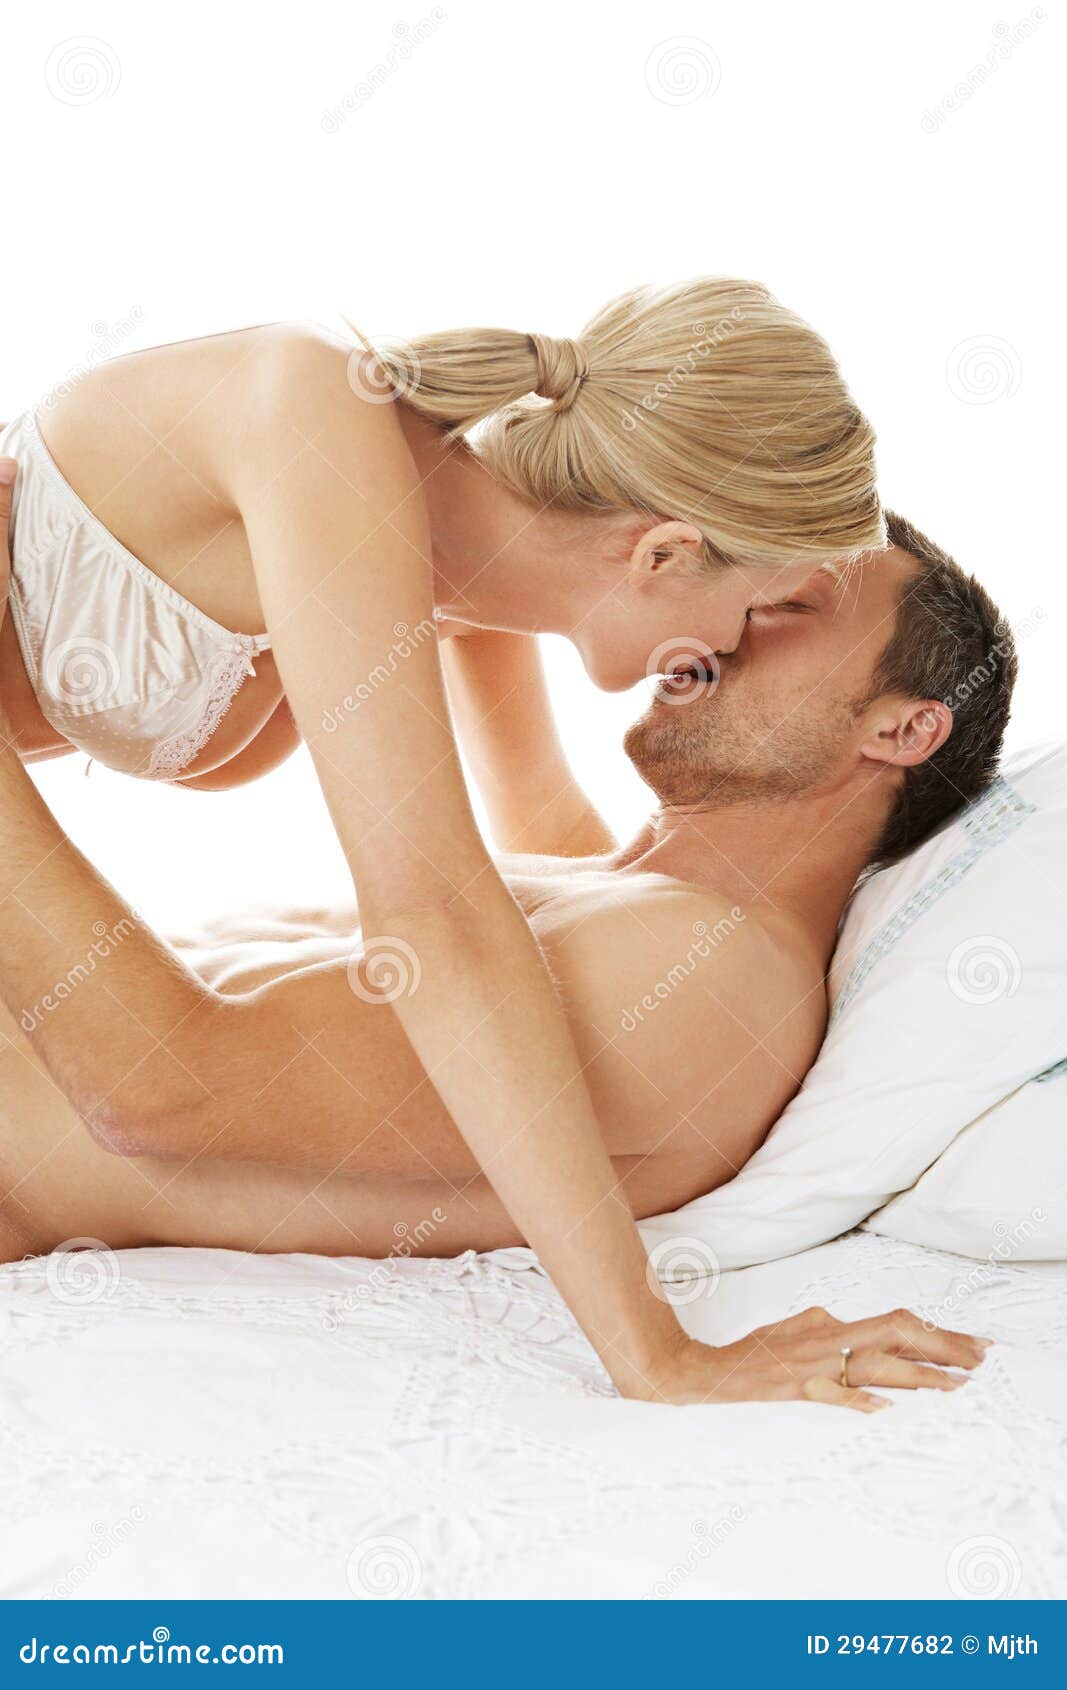 bill belli recommends hot couple on bed pic